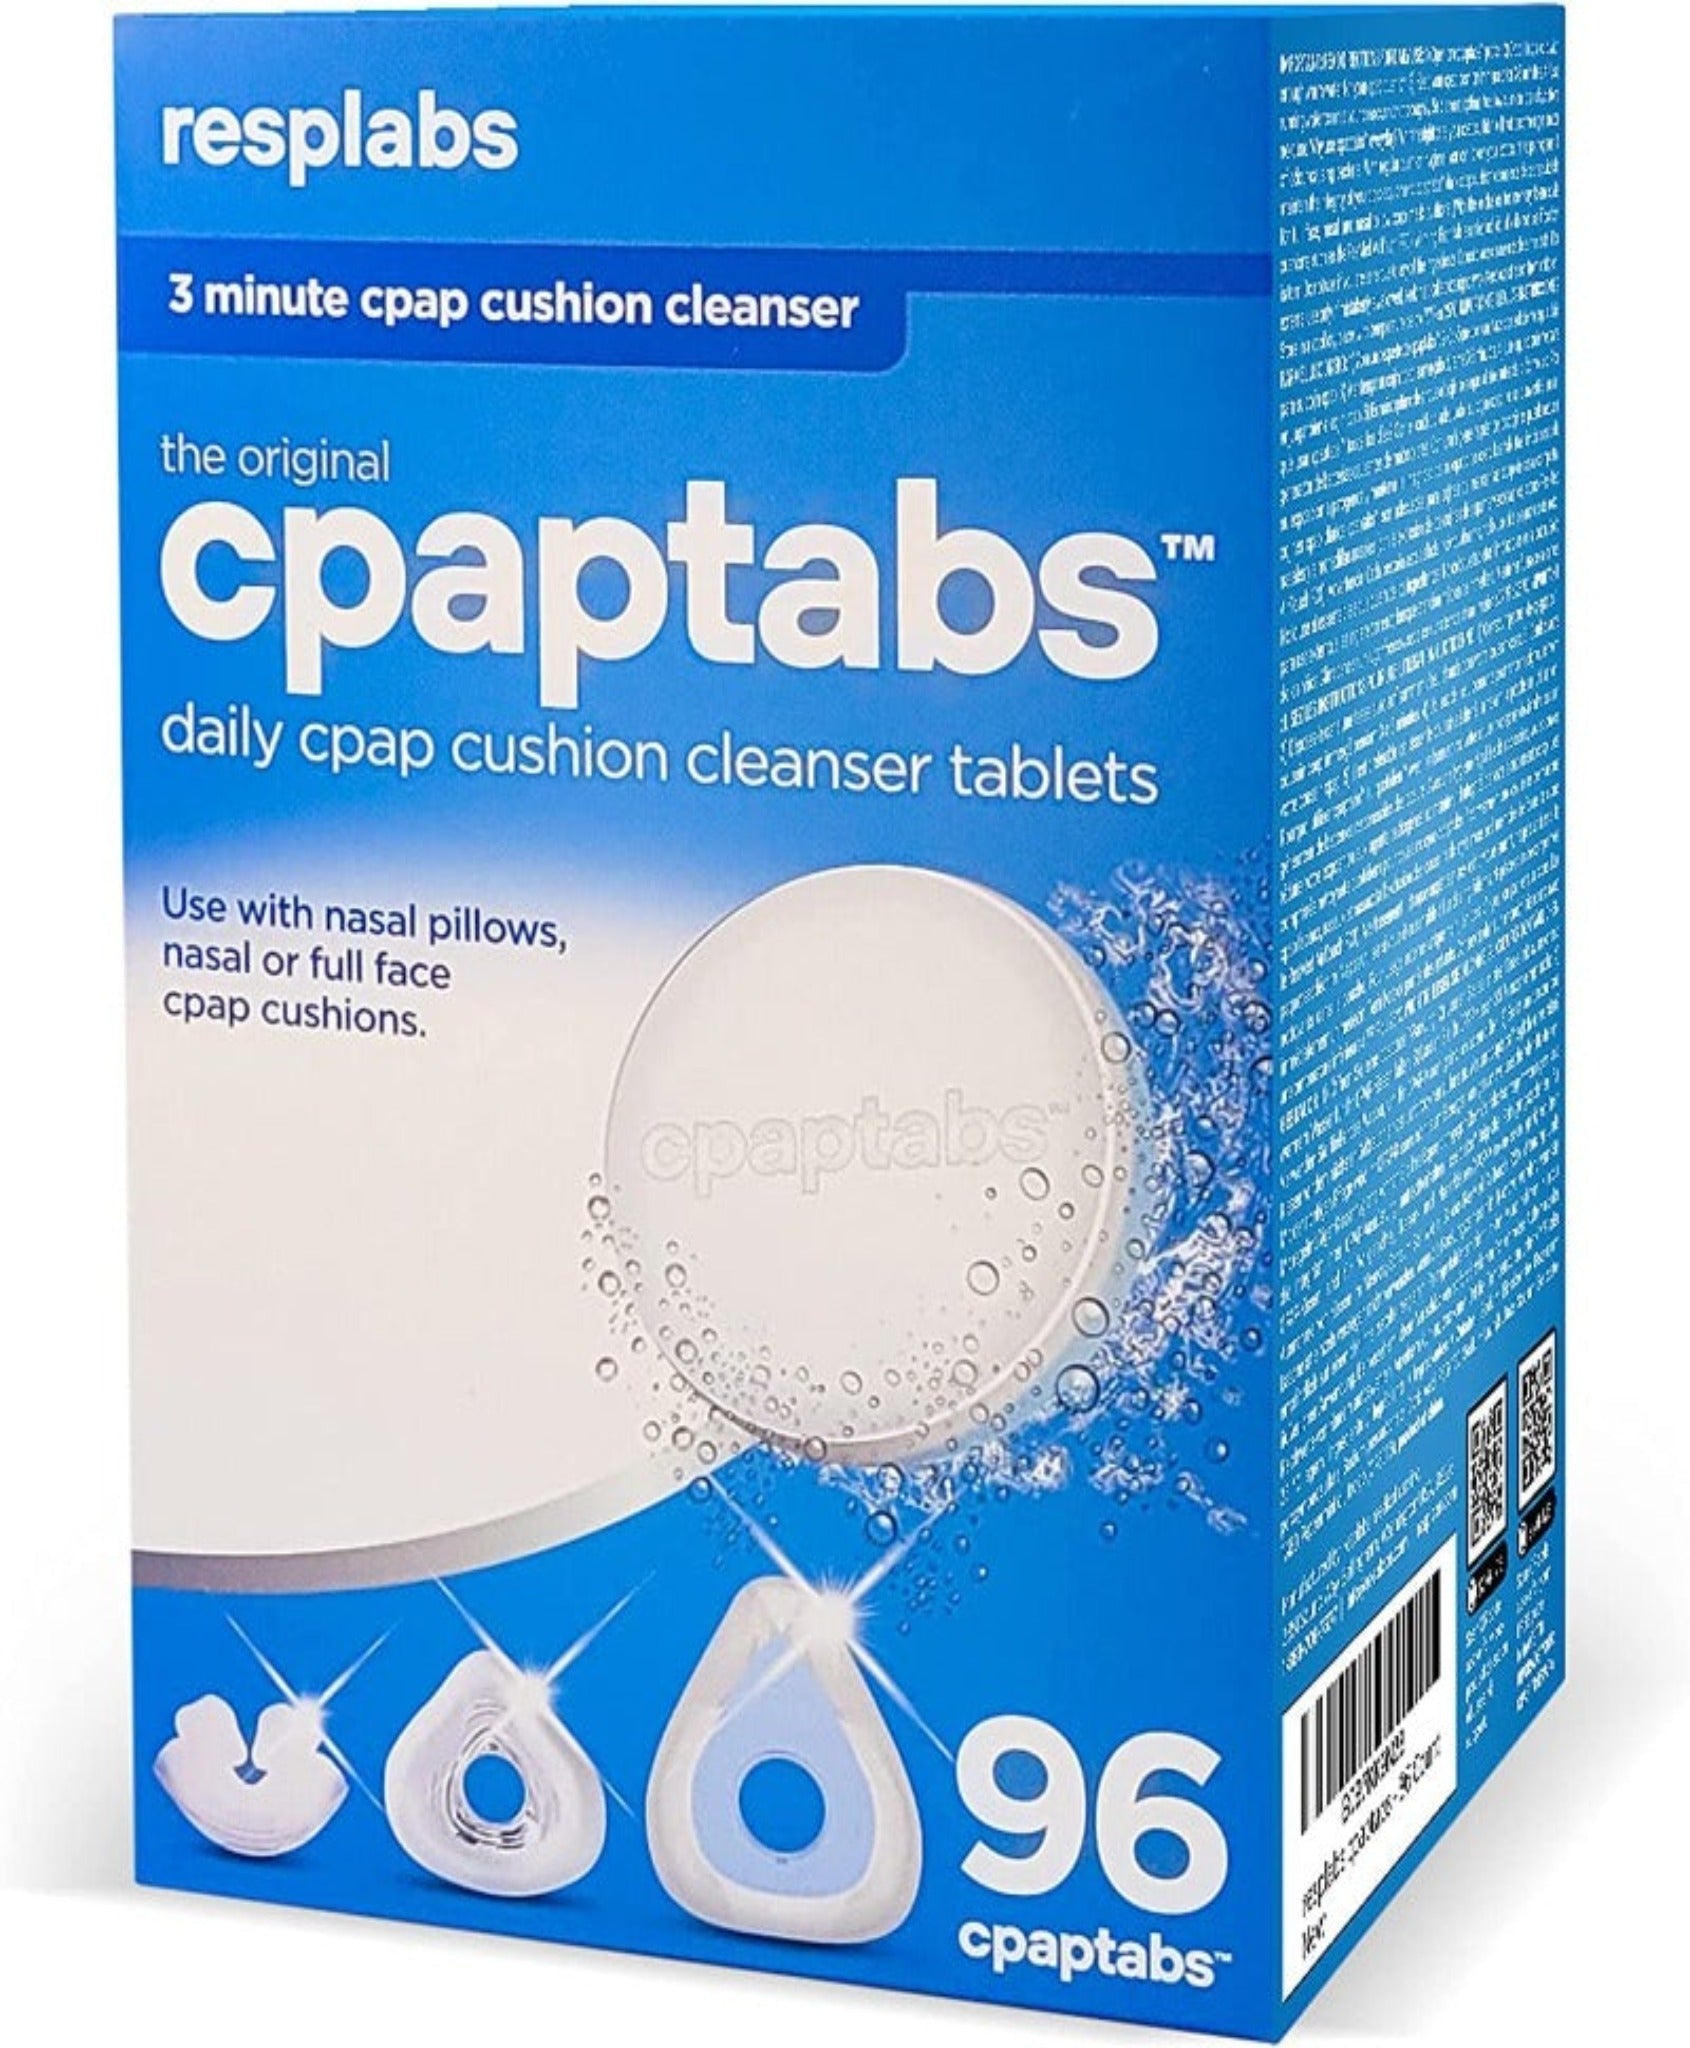 cpaptabs CPAP Mask Cushion Cleaner Tablets by resplabs - 3 Month Supply by resplabs - Sleep Technologies